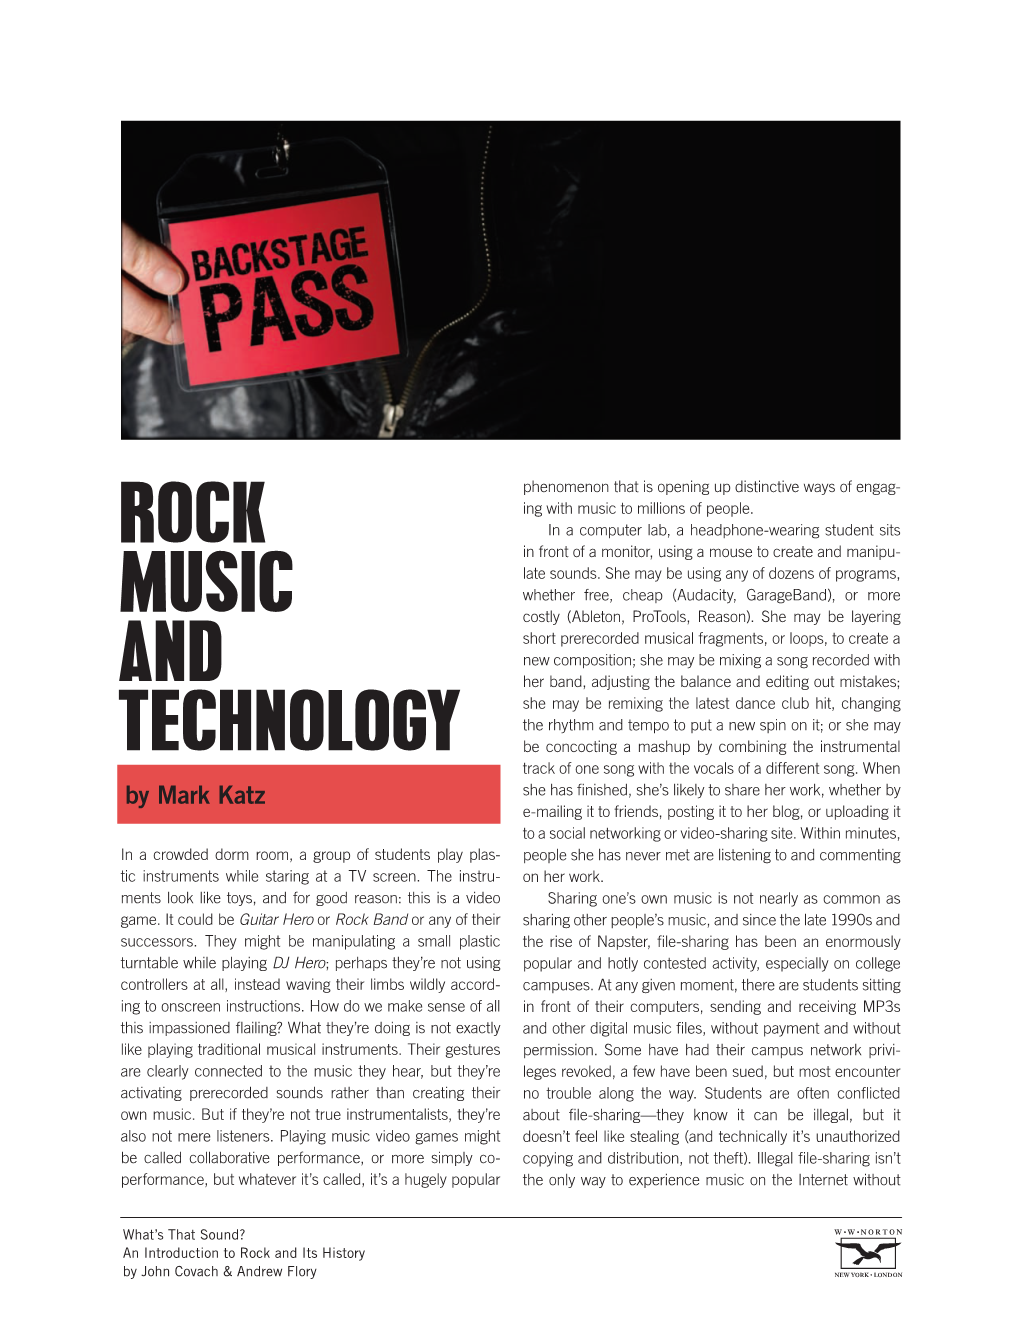 Rock Music and Technology